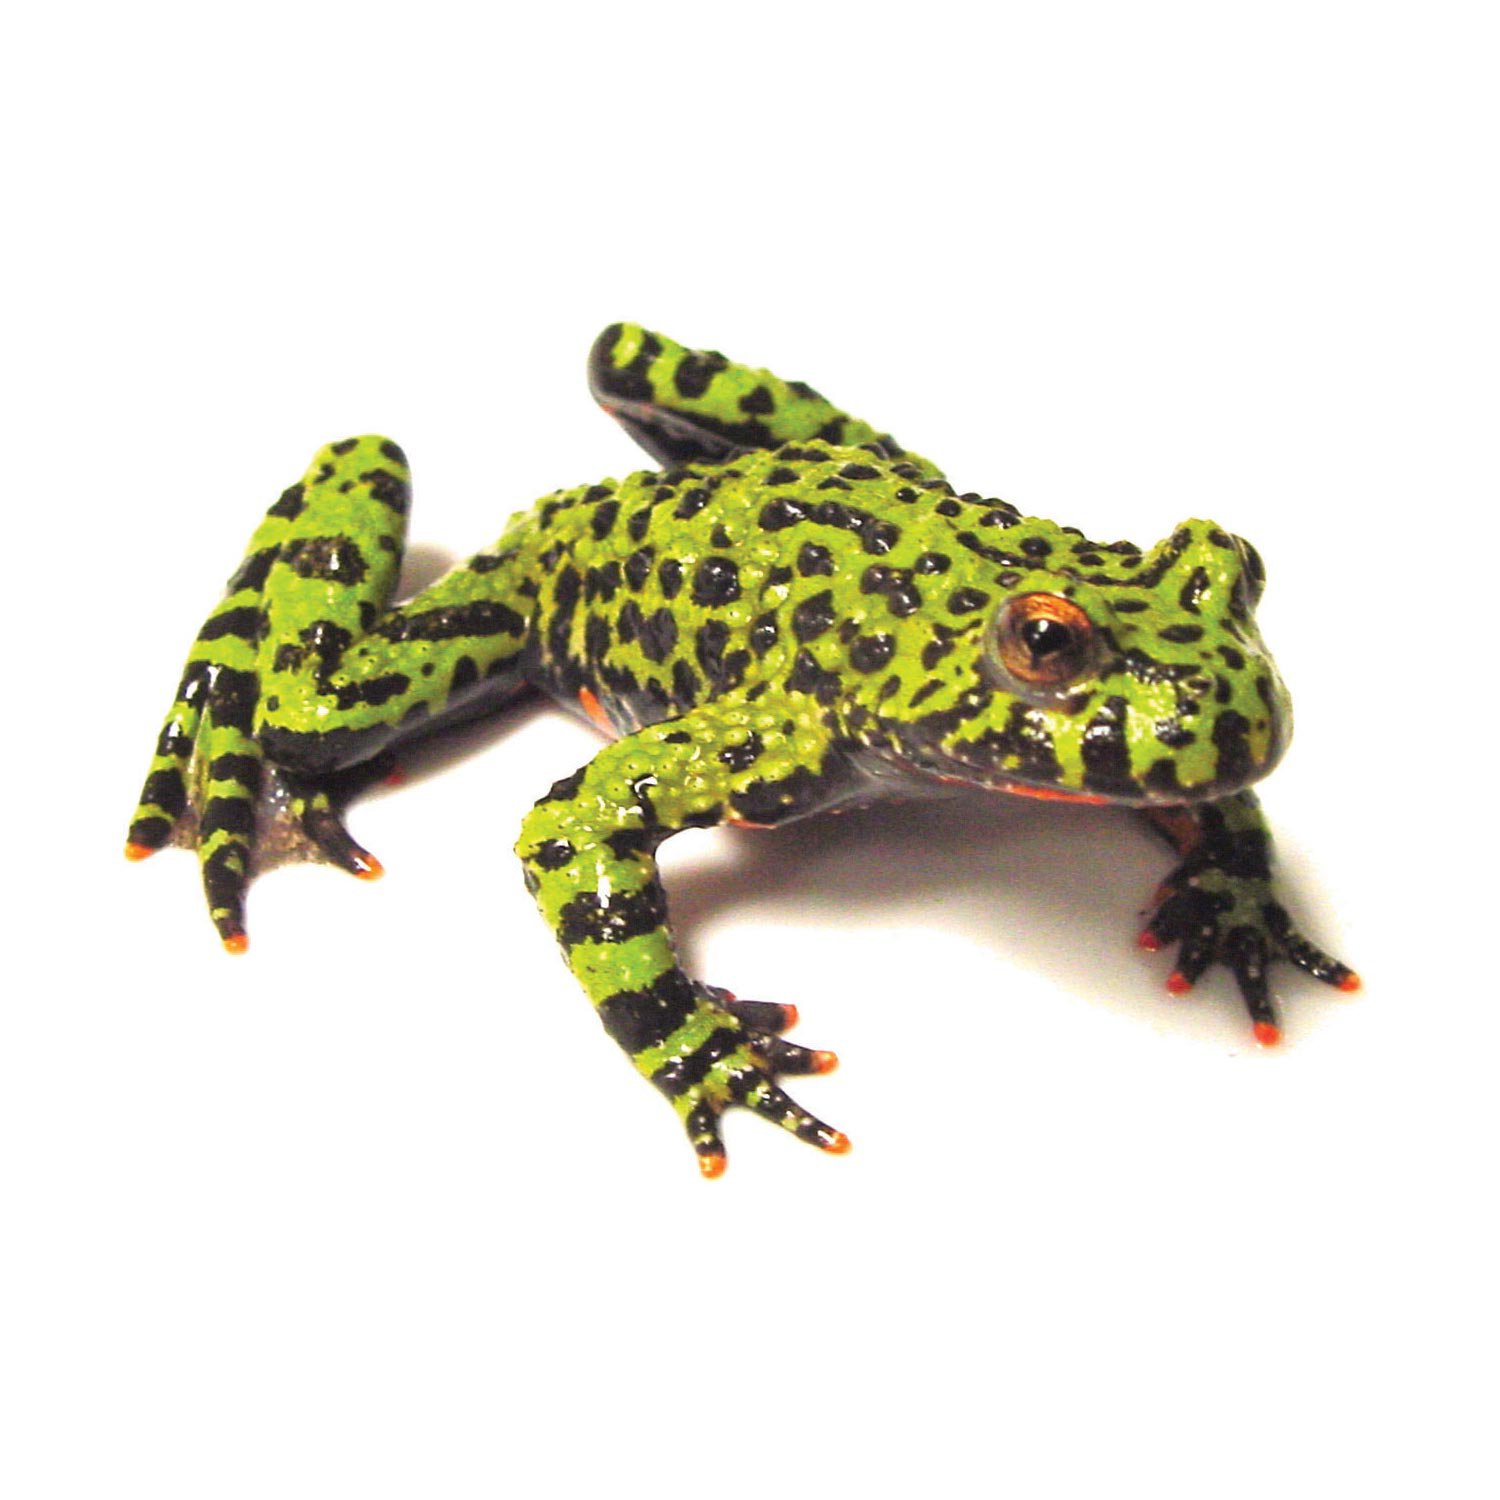 Fire Belly Toad: Oriental Fire Bellied Toad for Sale | Petco